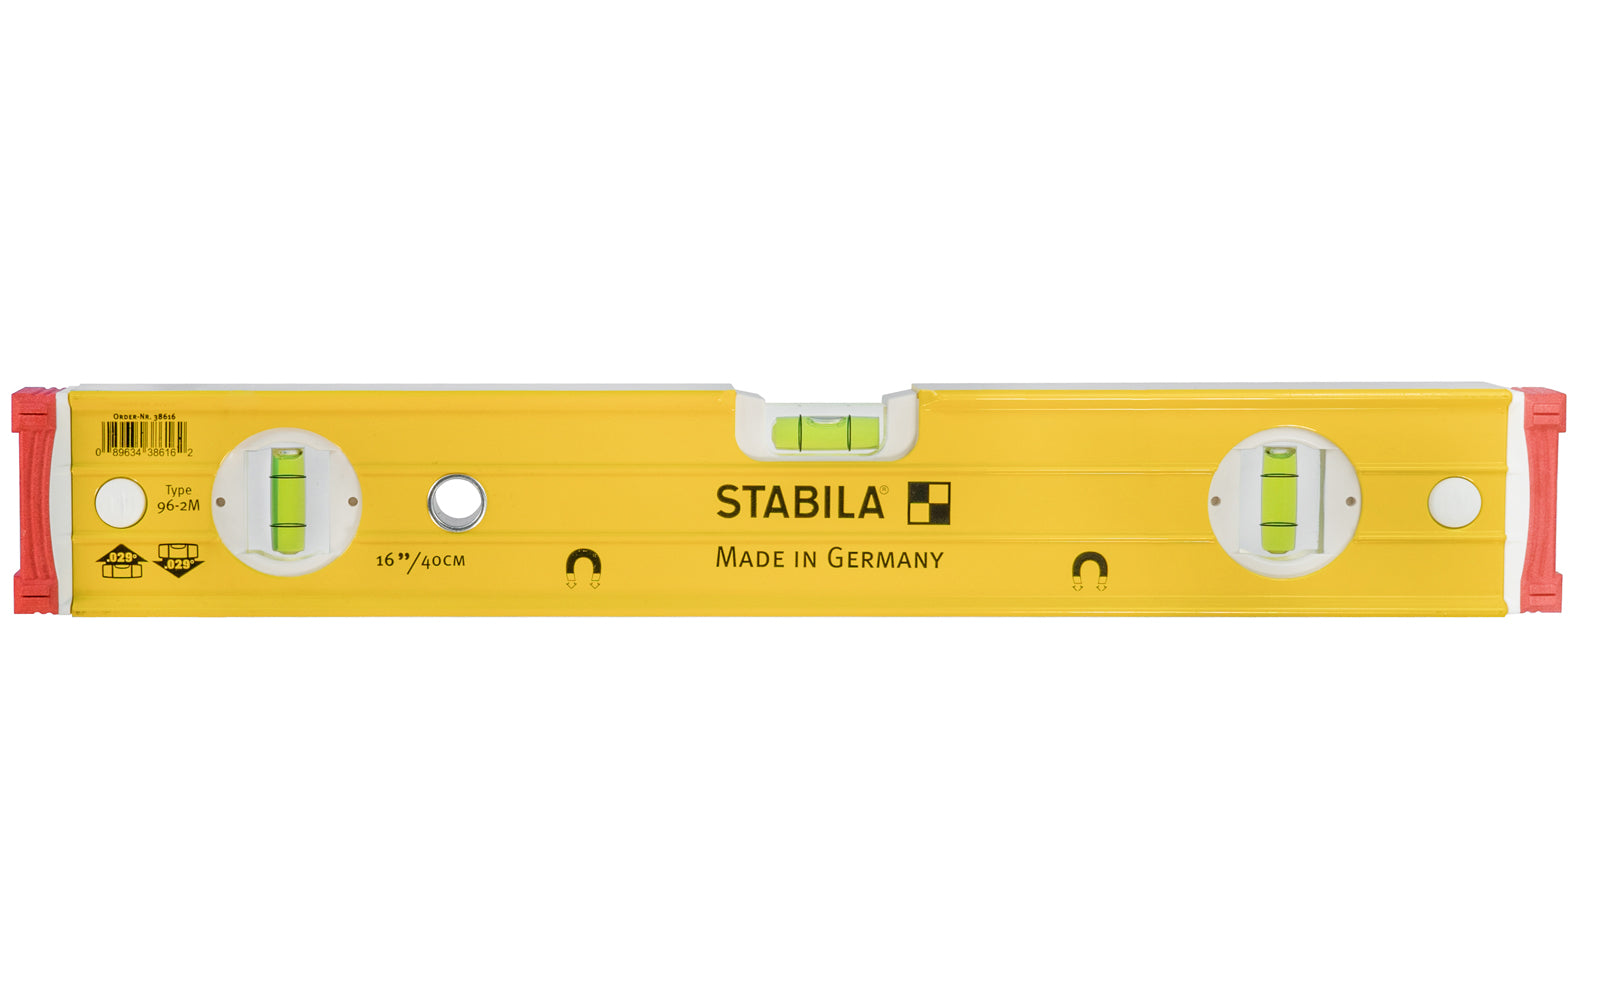 Stabila 16" (40 cm) Magnetic Level ~ Type 96-2M - No. 38616 ~ Made in Germany